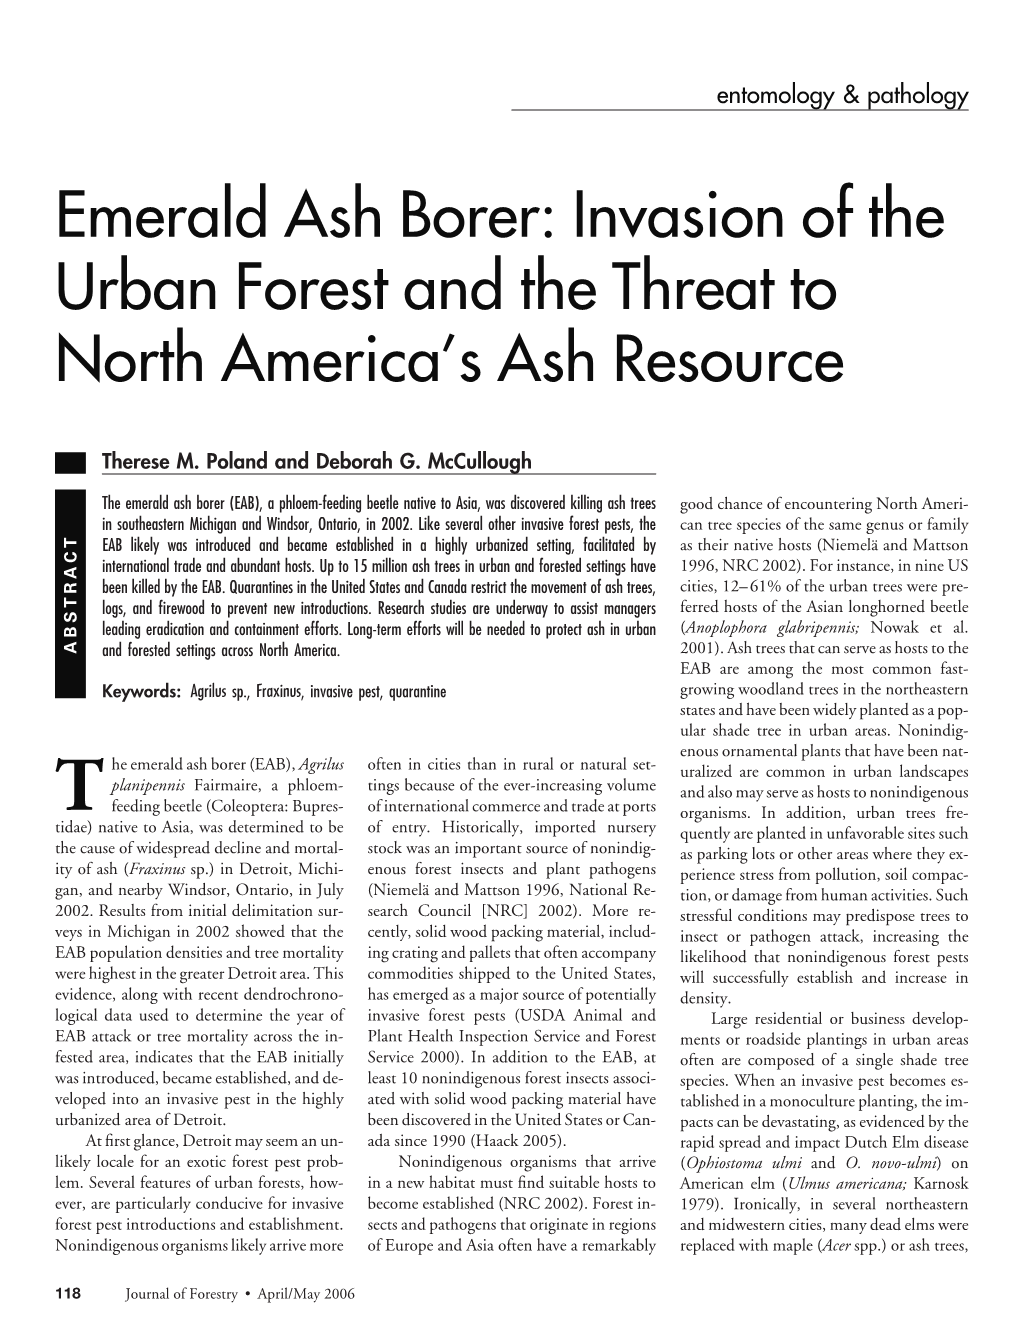 Emerald Ash Borer: Invasion of the Urban Forest and the Threat to North America’S Ash Resource